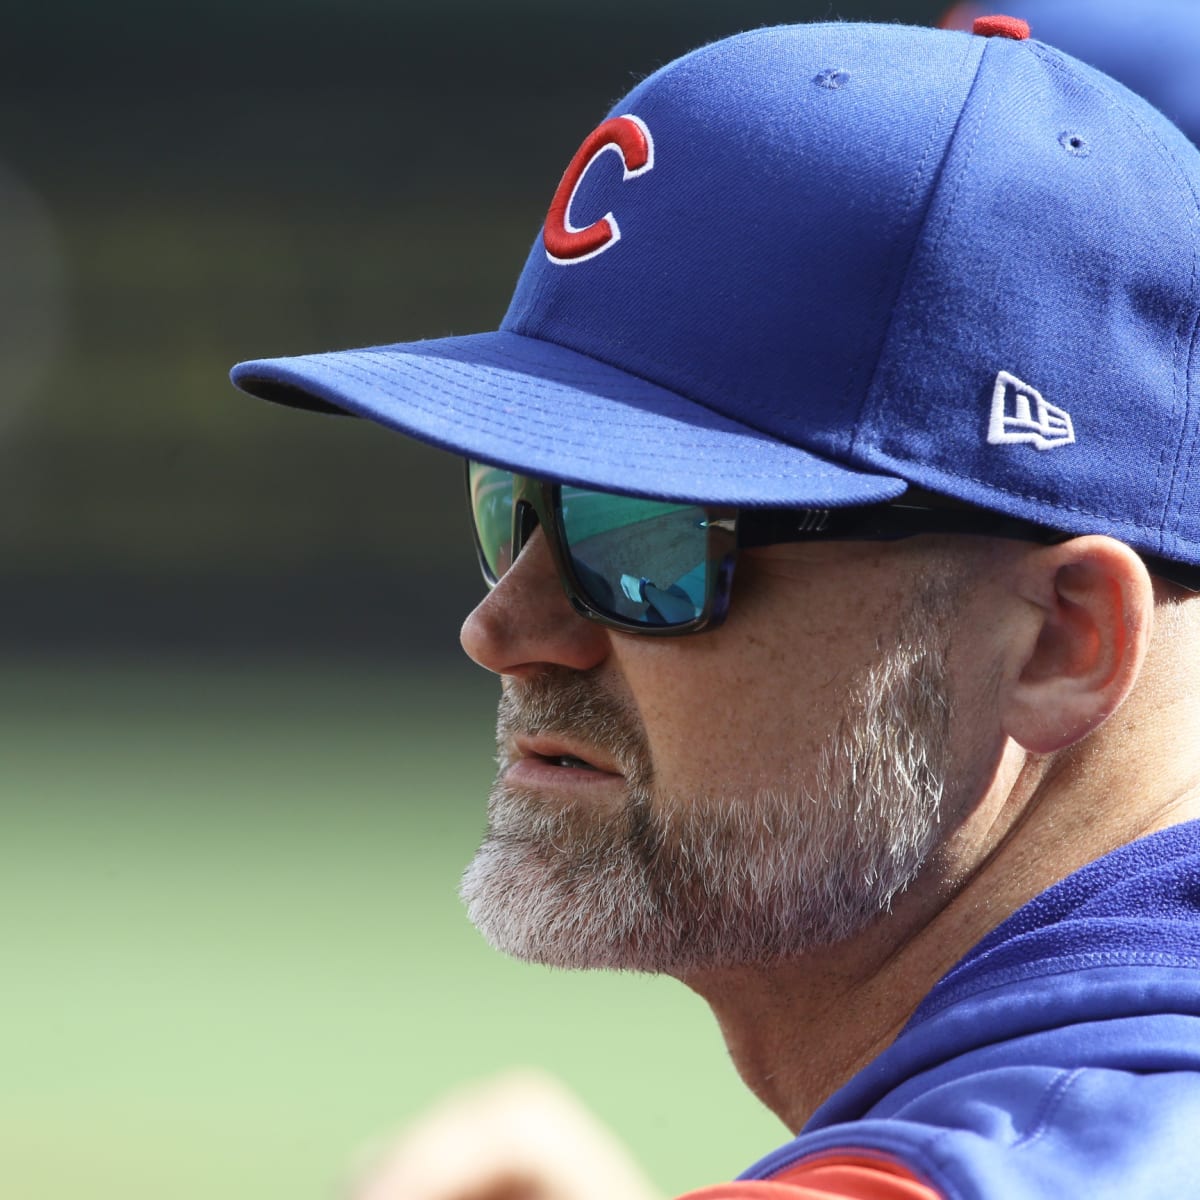 Bastian] Cubs manager David Ross, on Dansby Swanson's performance